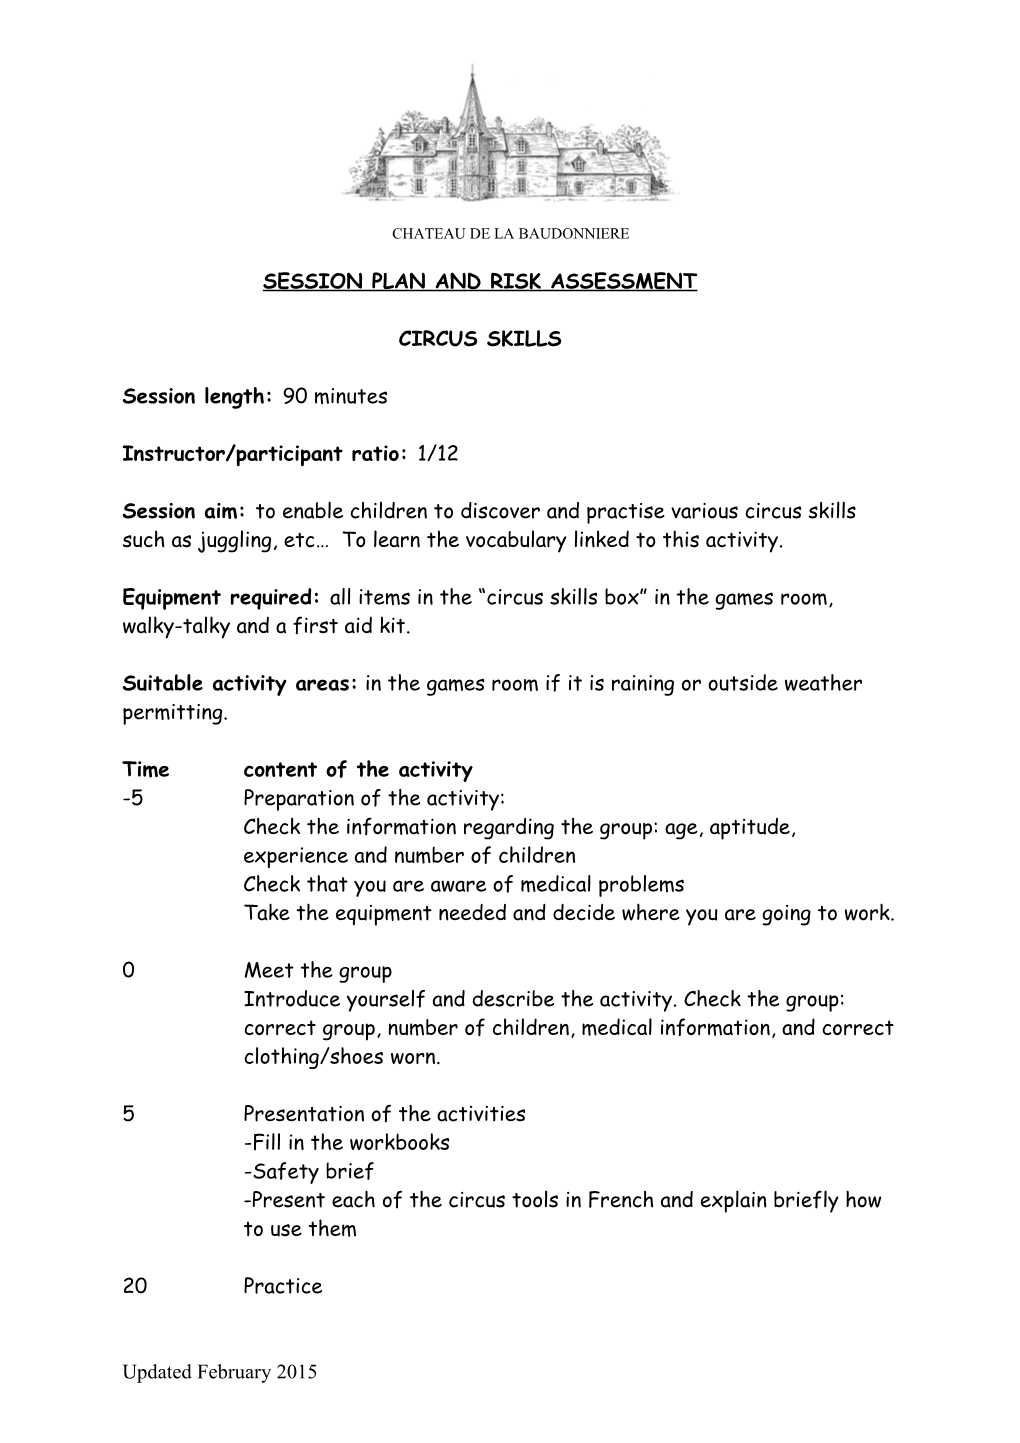 Session Plan and Risk Assessment